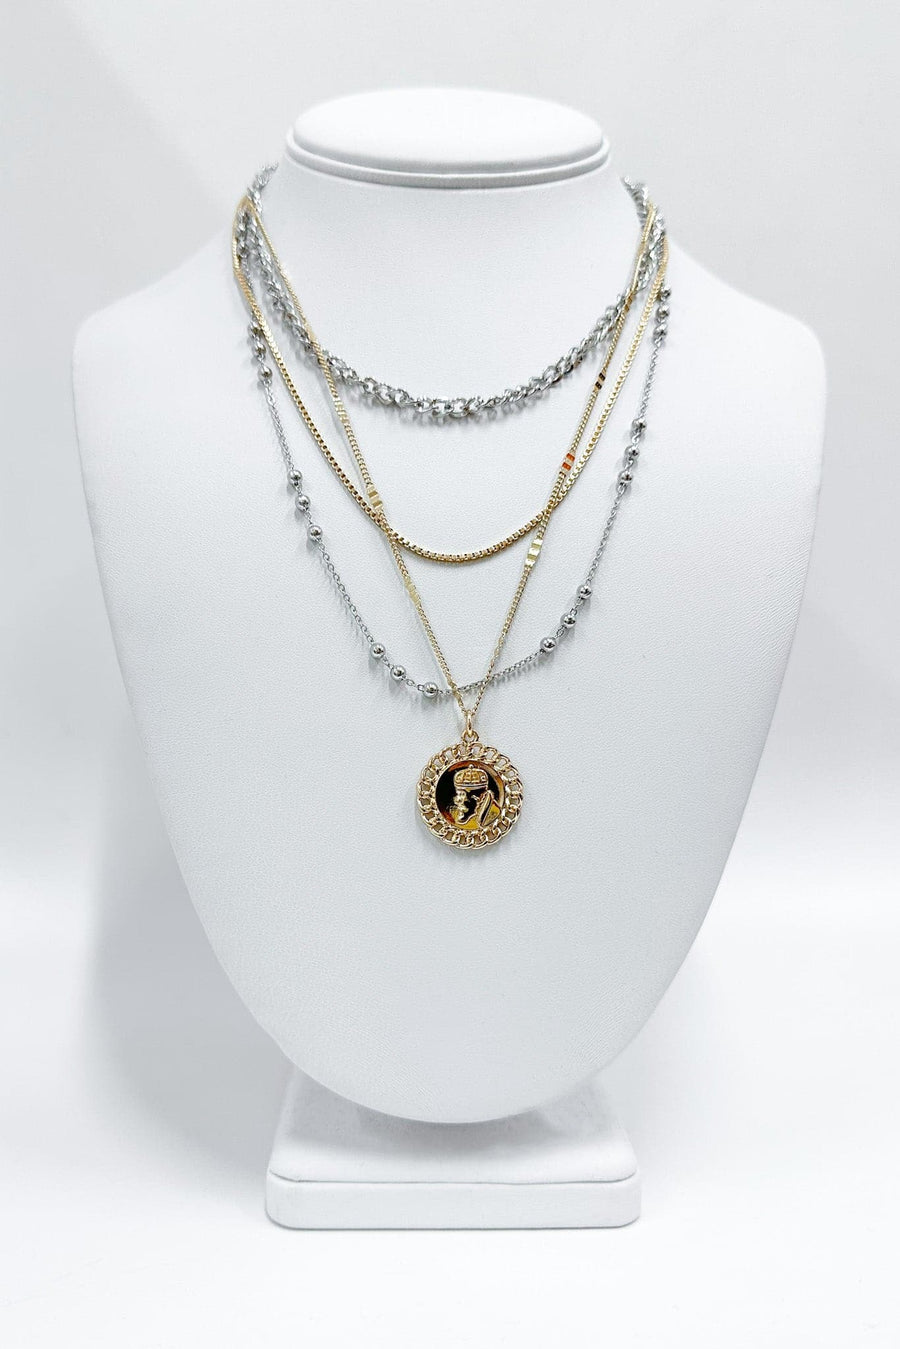 Gold/Silver Kaimana Multi Chain Coin Layered Necklace - BACK IN STOCK - Madison and Mallory